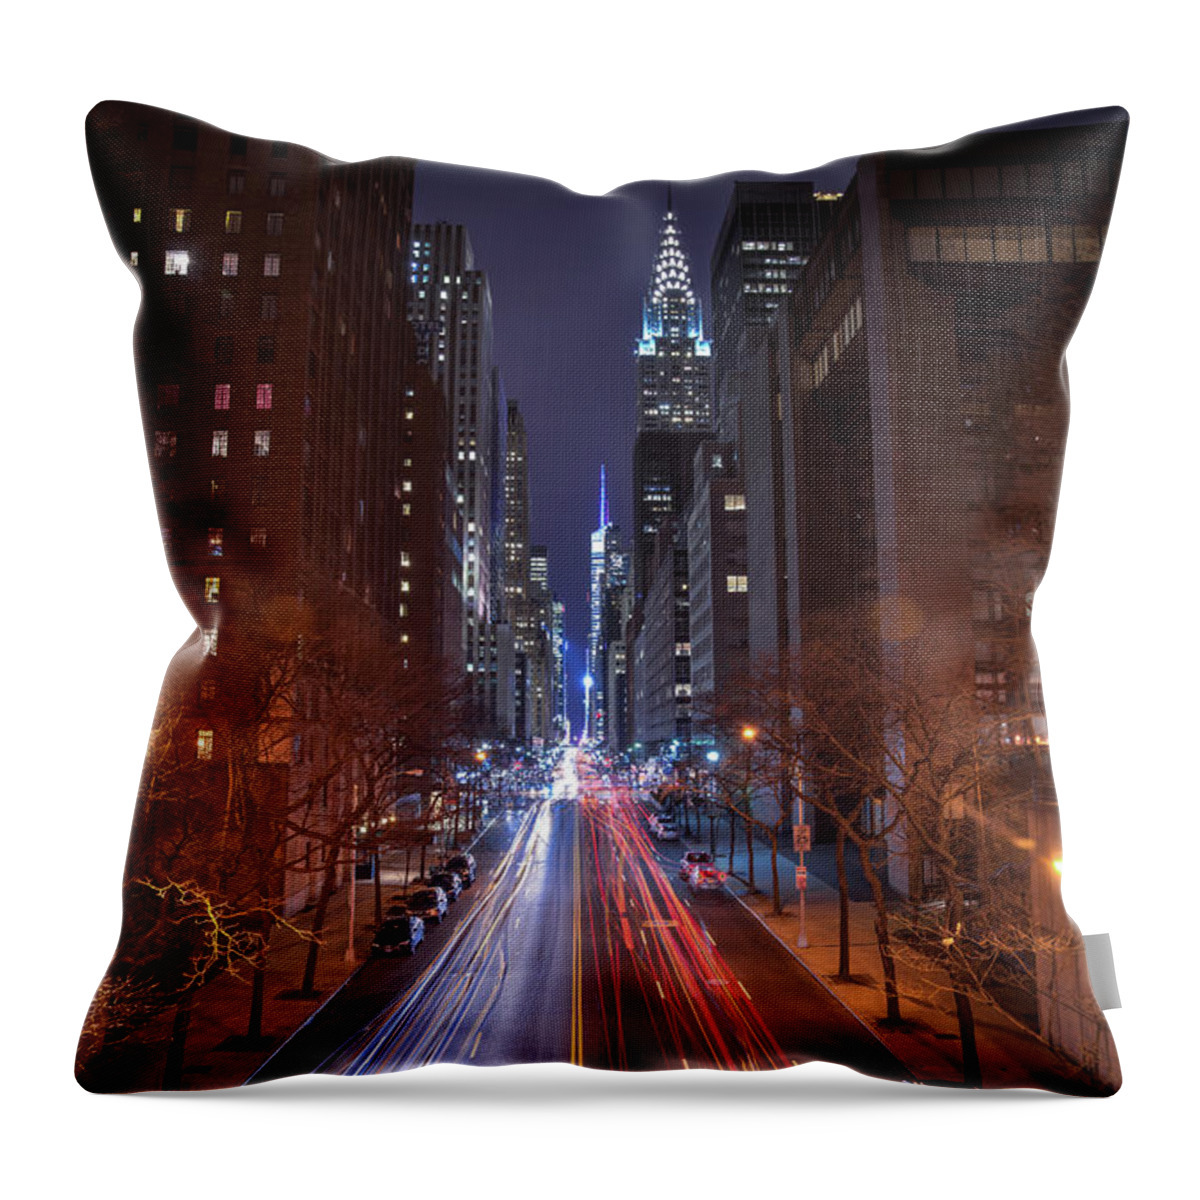 New York City Throw Pillow featuring the photograph Tudor Pl by Raf Winterpacht